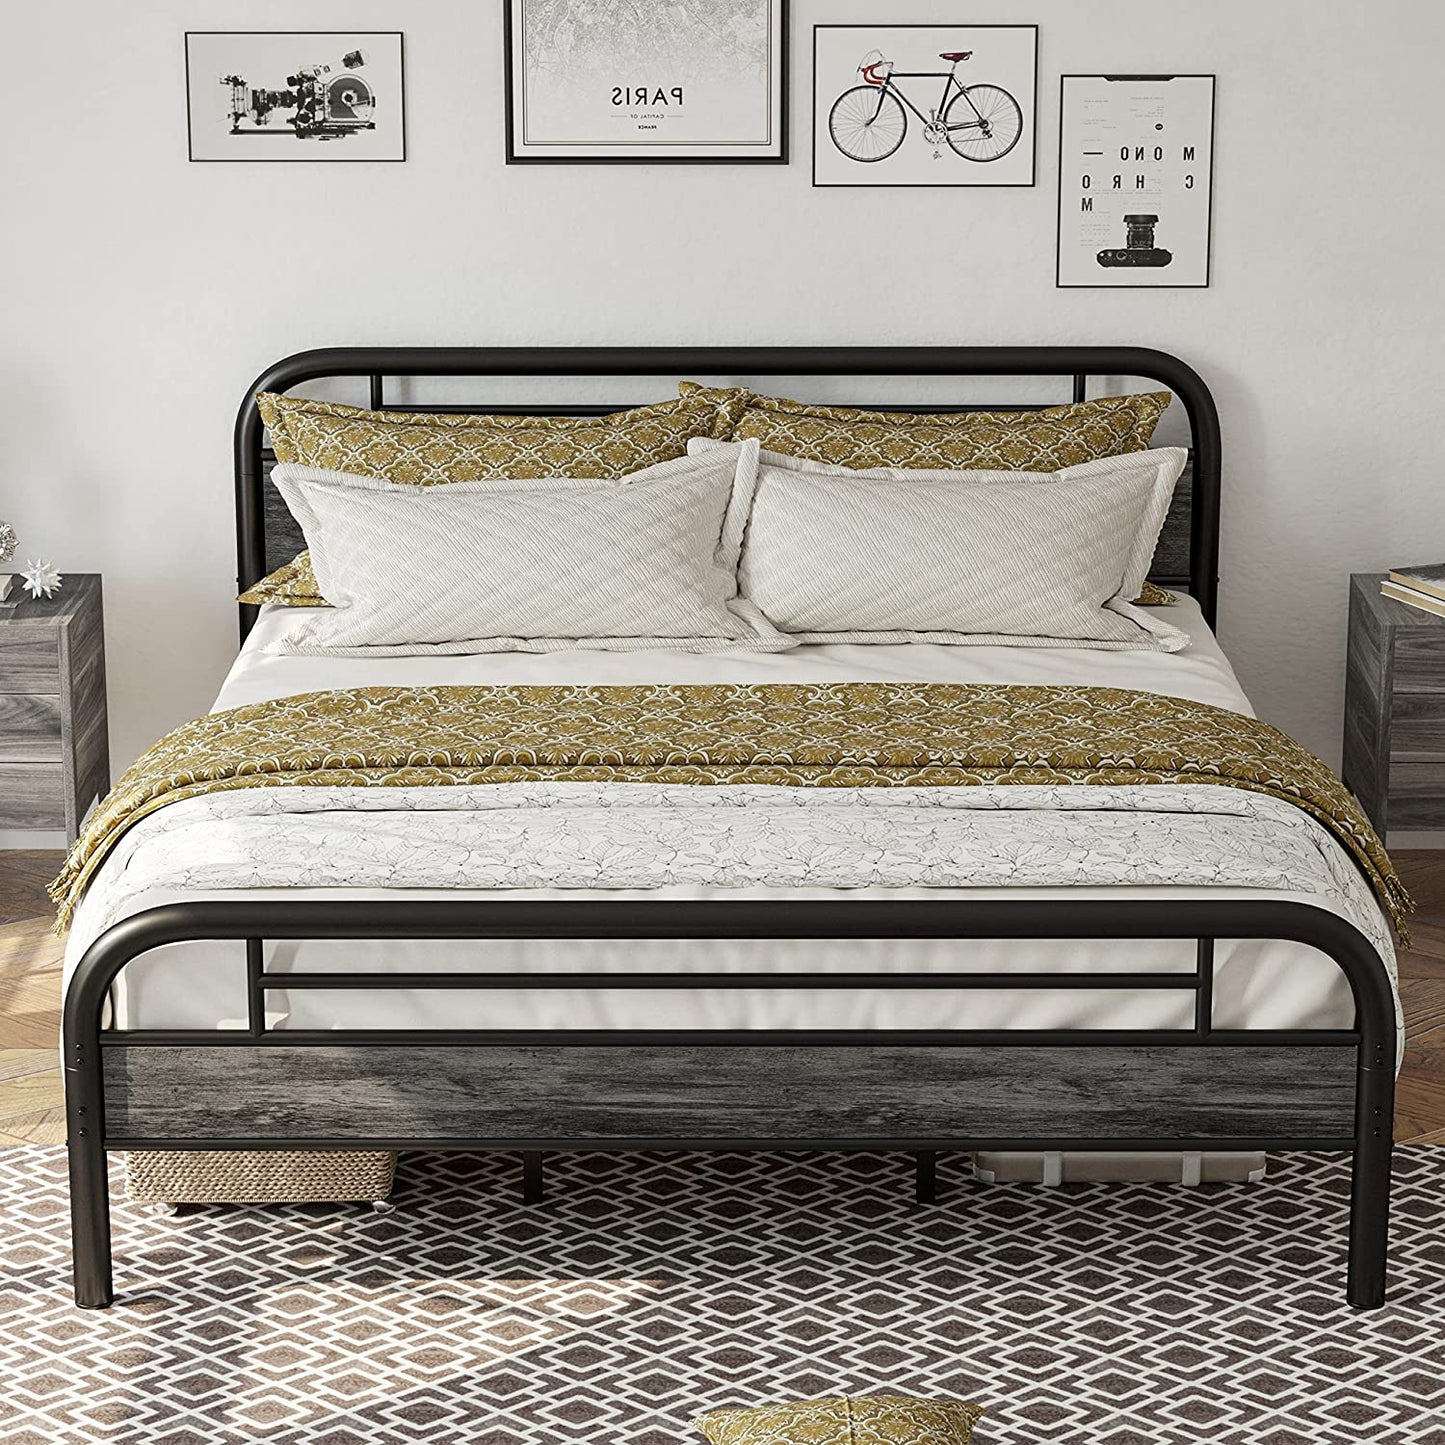 LIKIMIO California King Bed Frames Industrial Gray